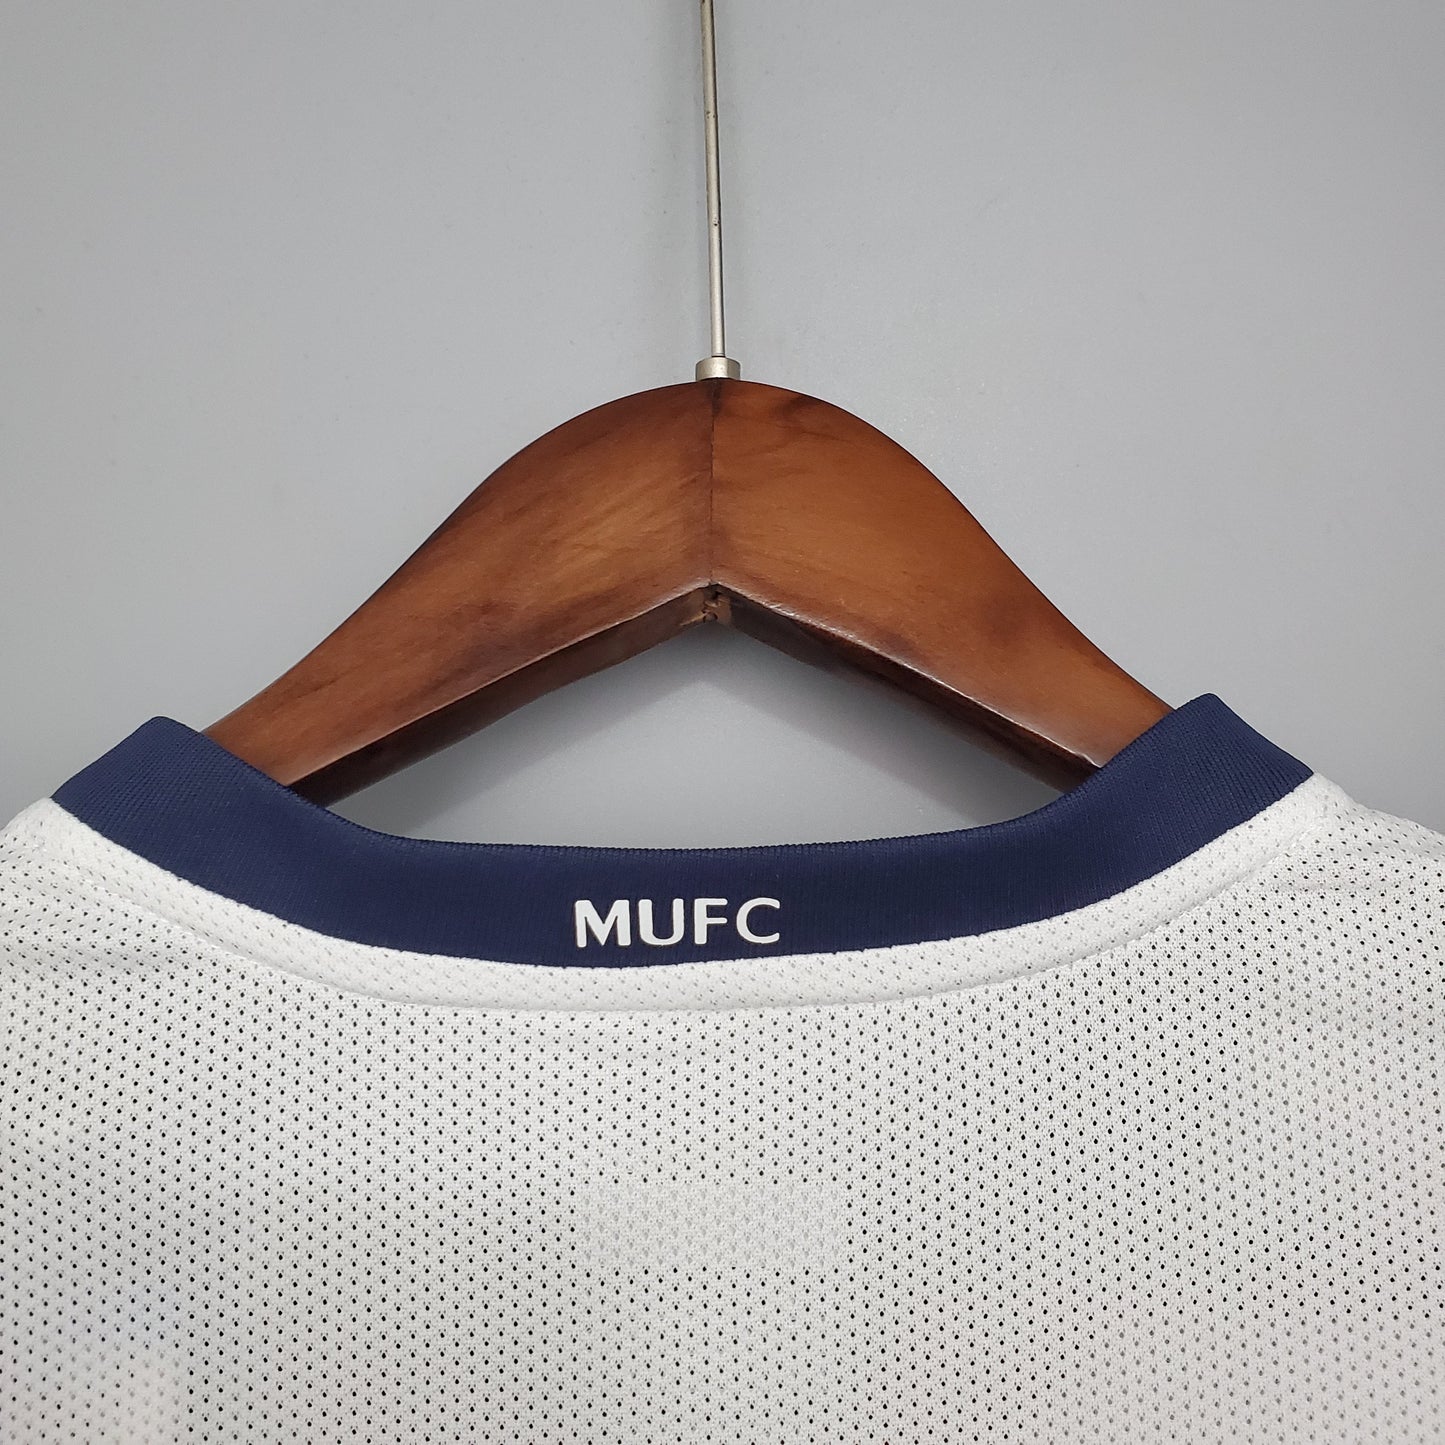 MANCHESTER UNITED 2008 - 2009 AWAY JERSEY